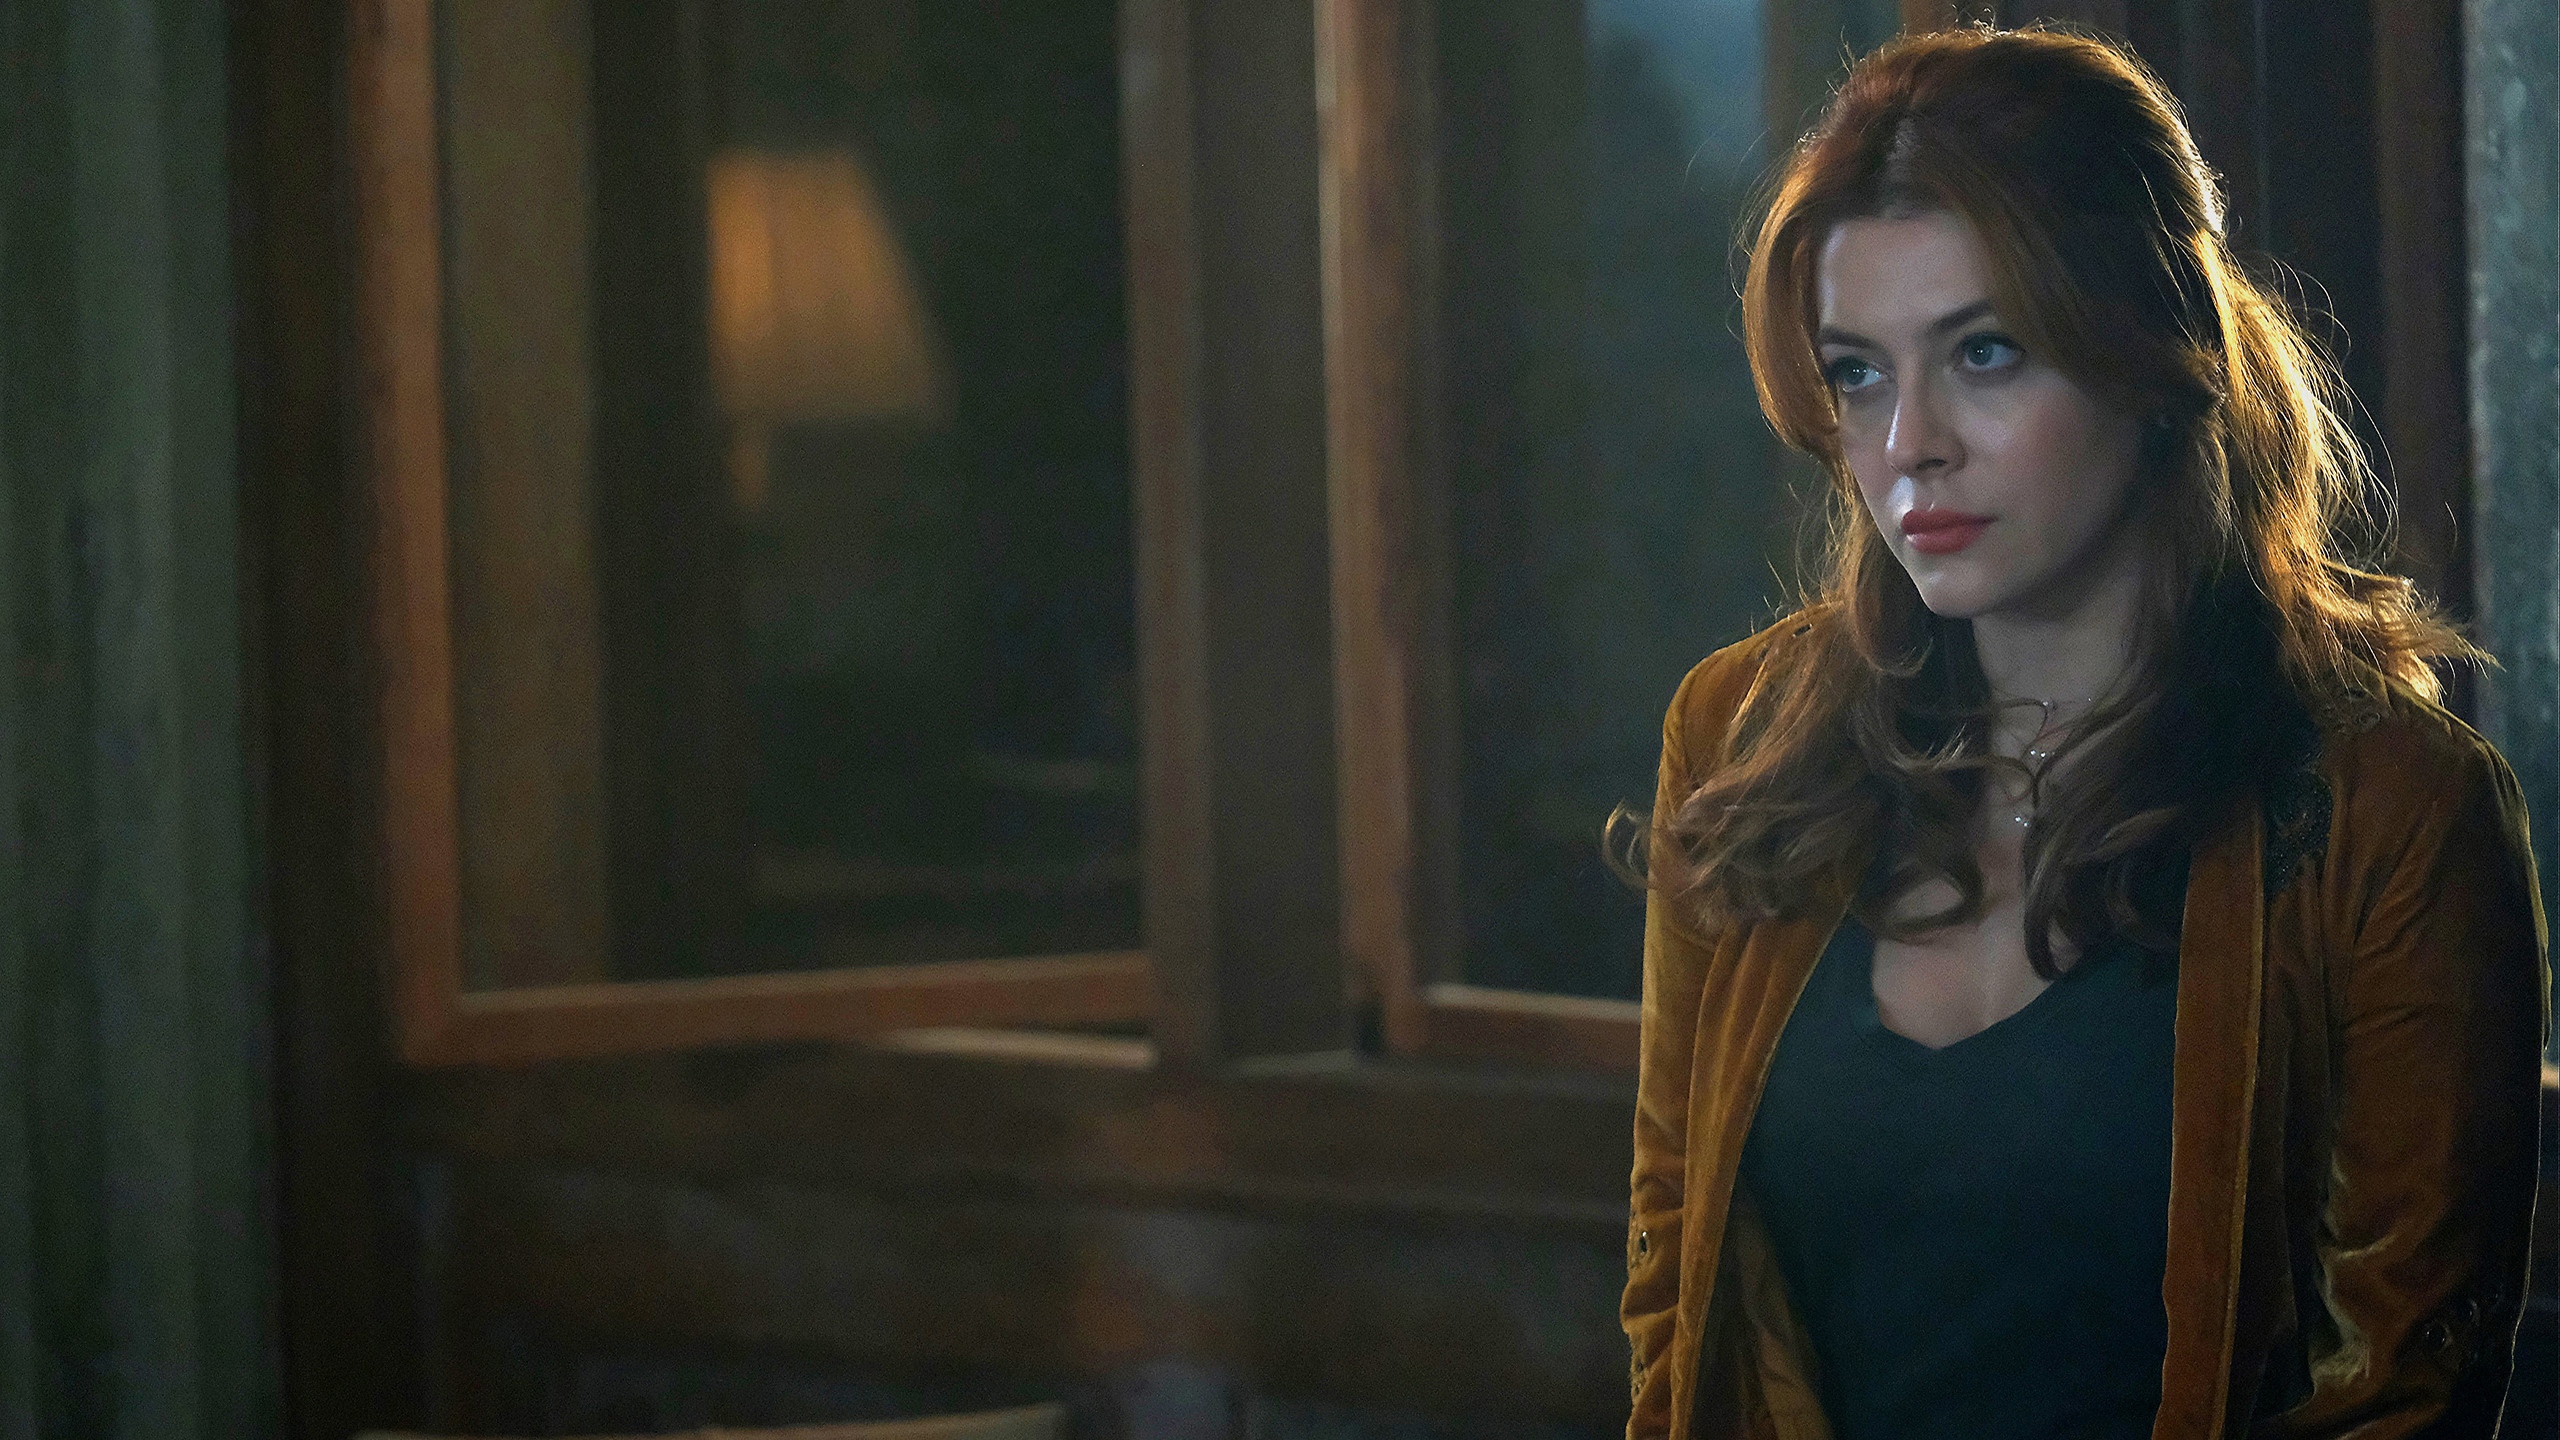 The Gifted Tv Series Elena Satine As Dreamer Thumbnail - Elena Satine The Gifted Death , HD Wallpaper & Backgrounds